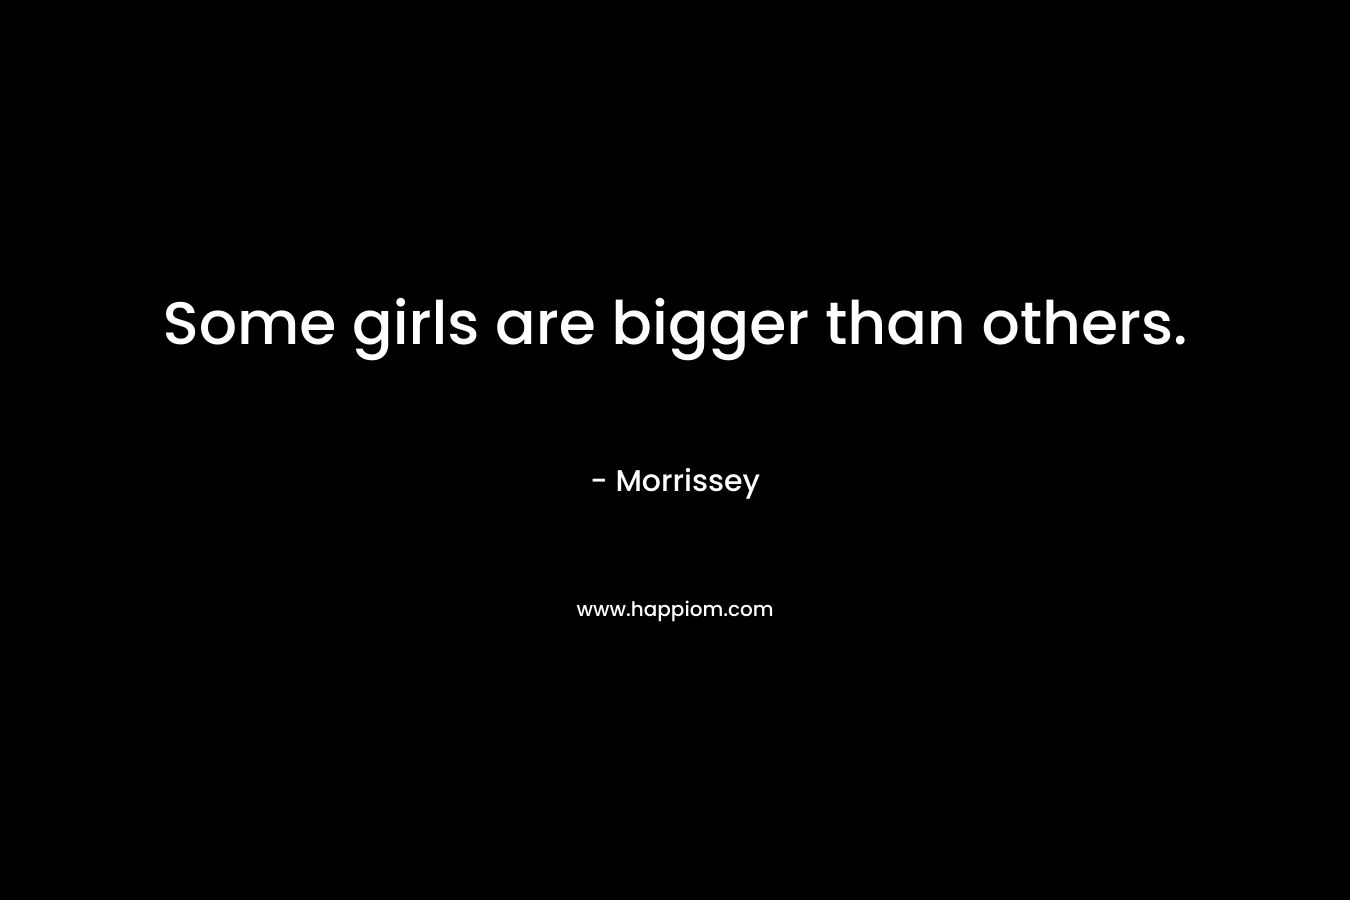 Some girls are bigger than others.